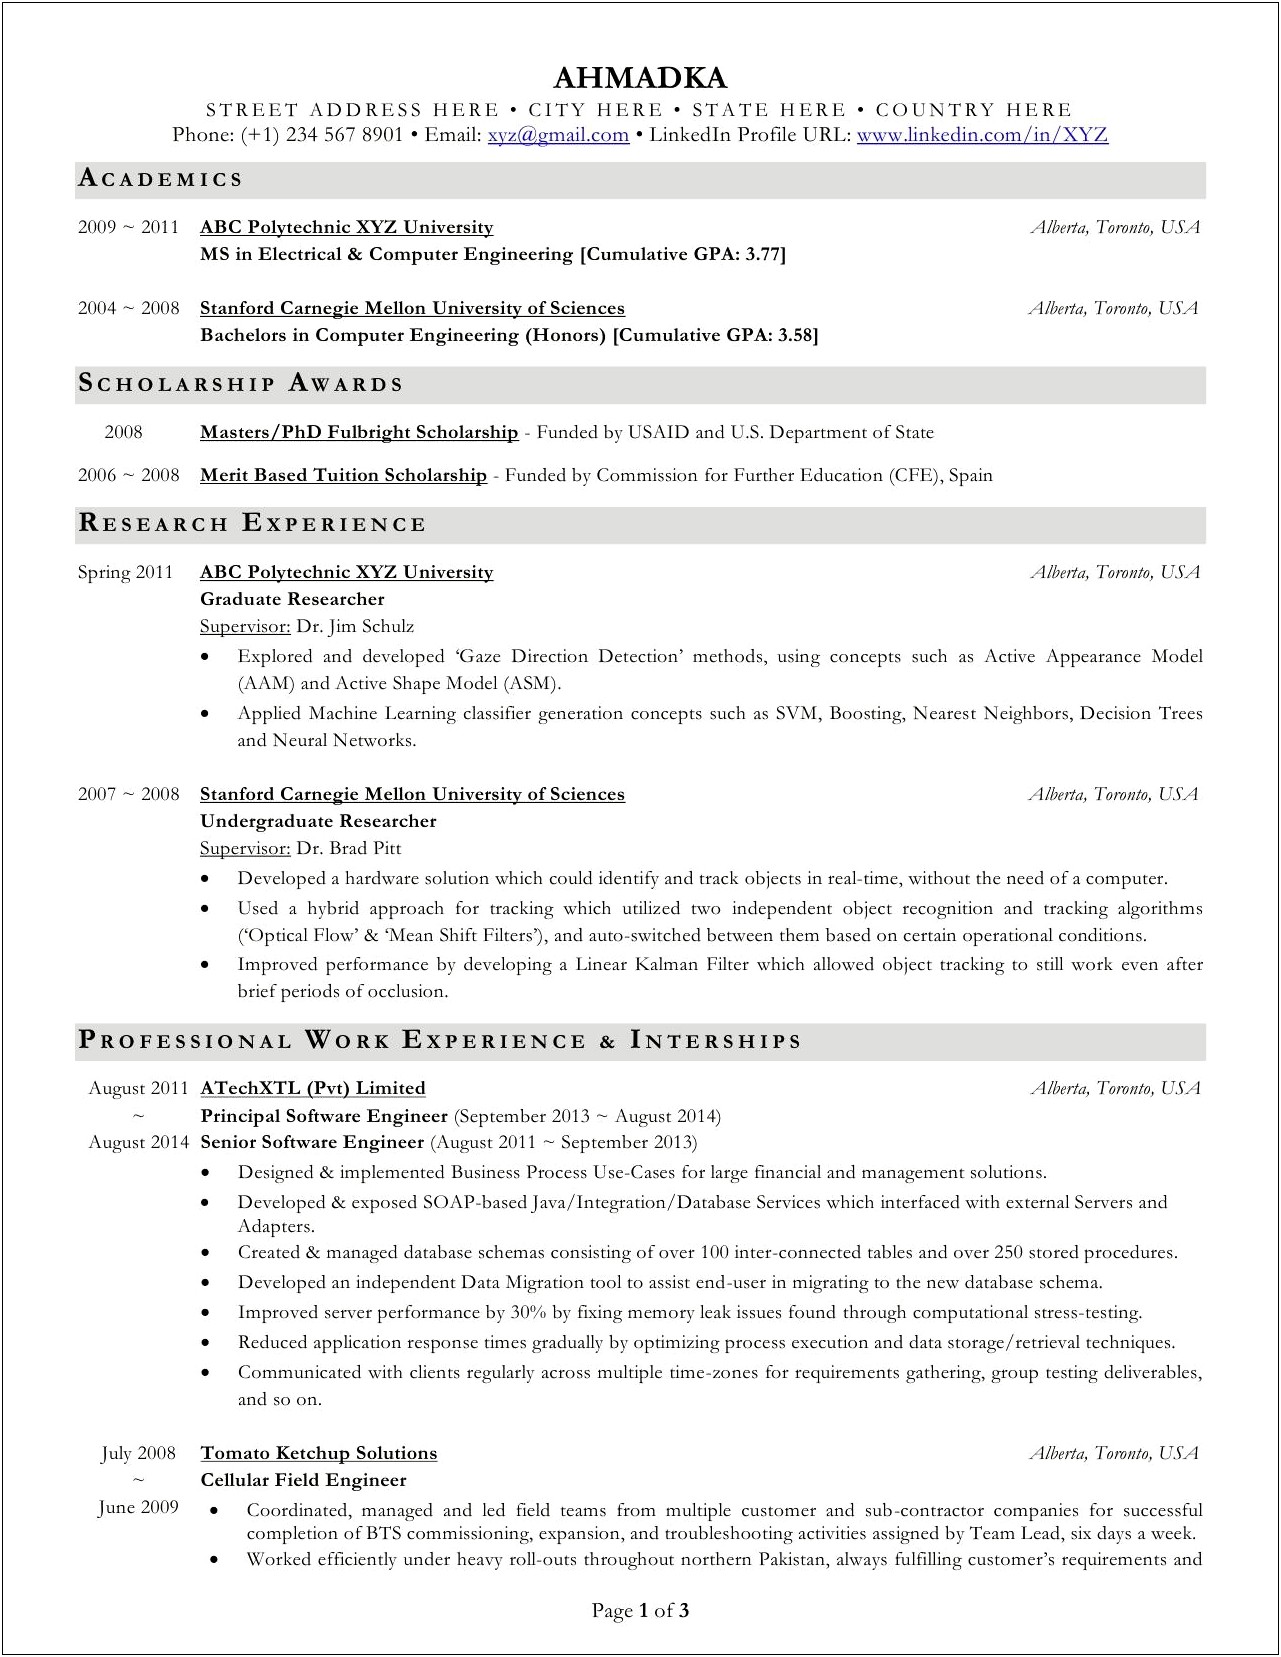 Resume Template For Graduate School In Computers